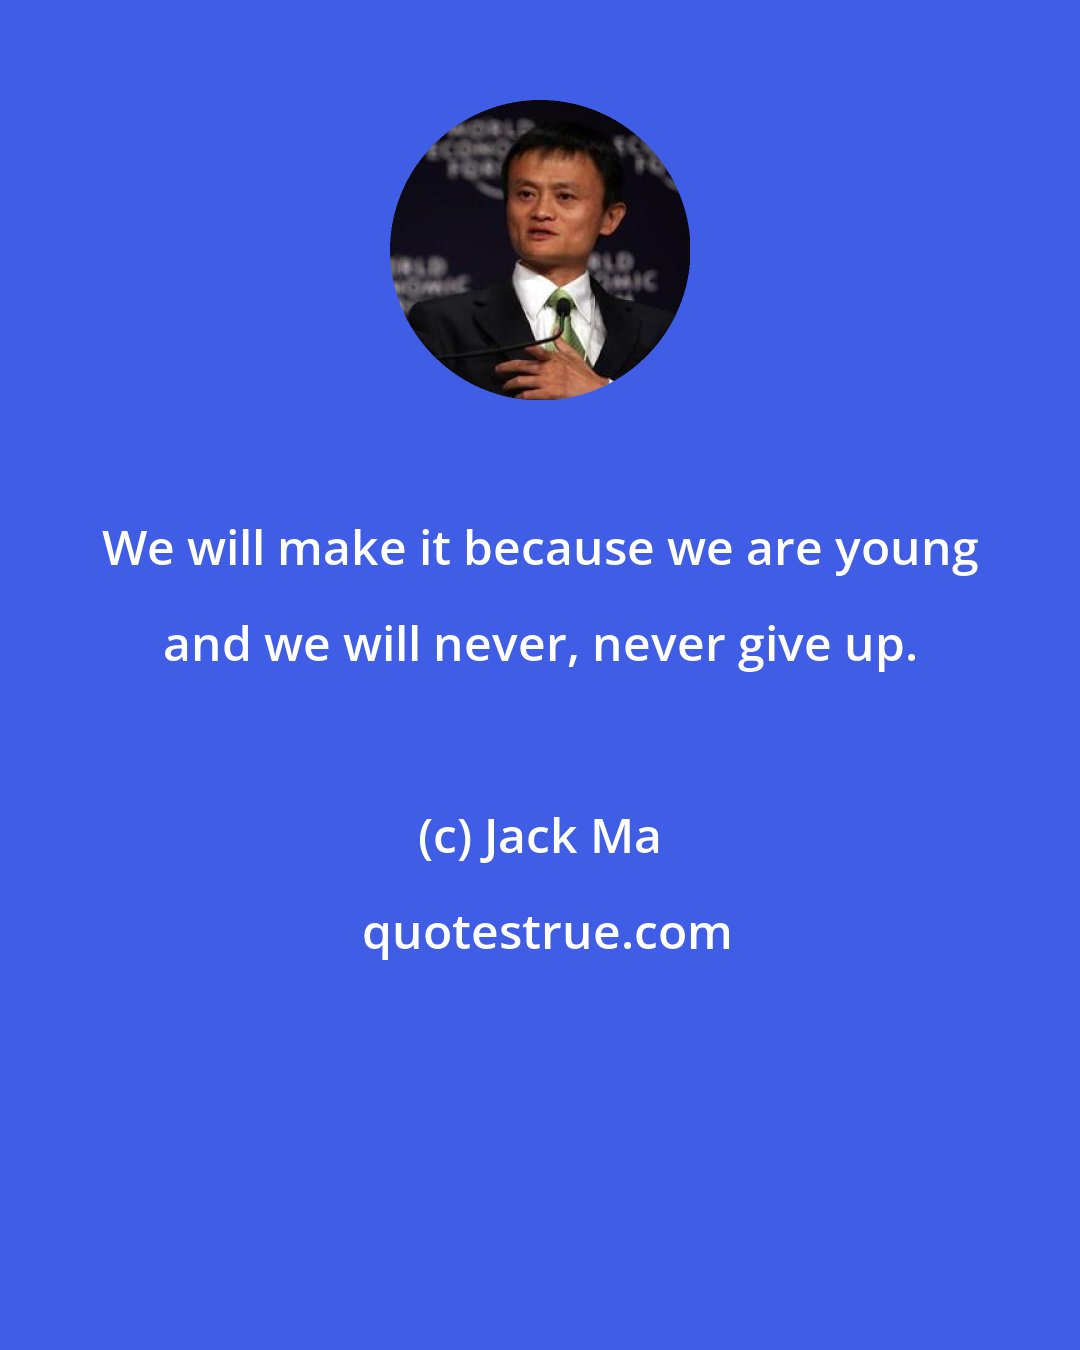 Jack Ma: We will make it because we are young and we will never, never give up.